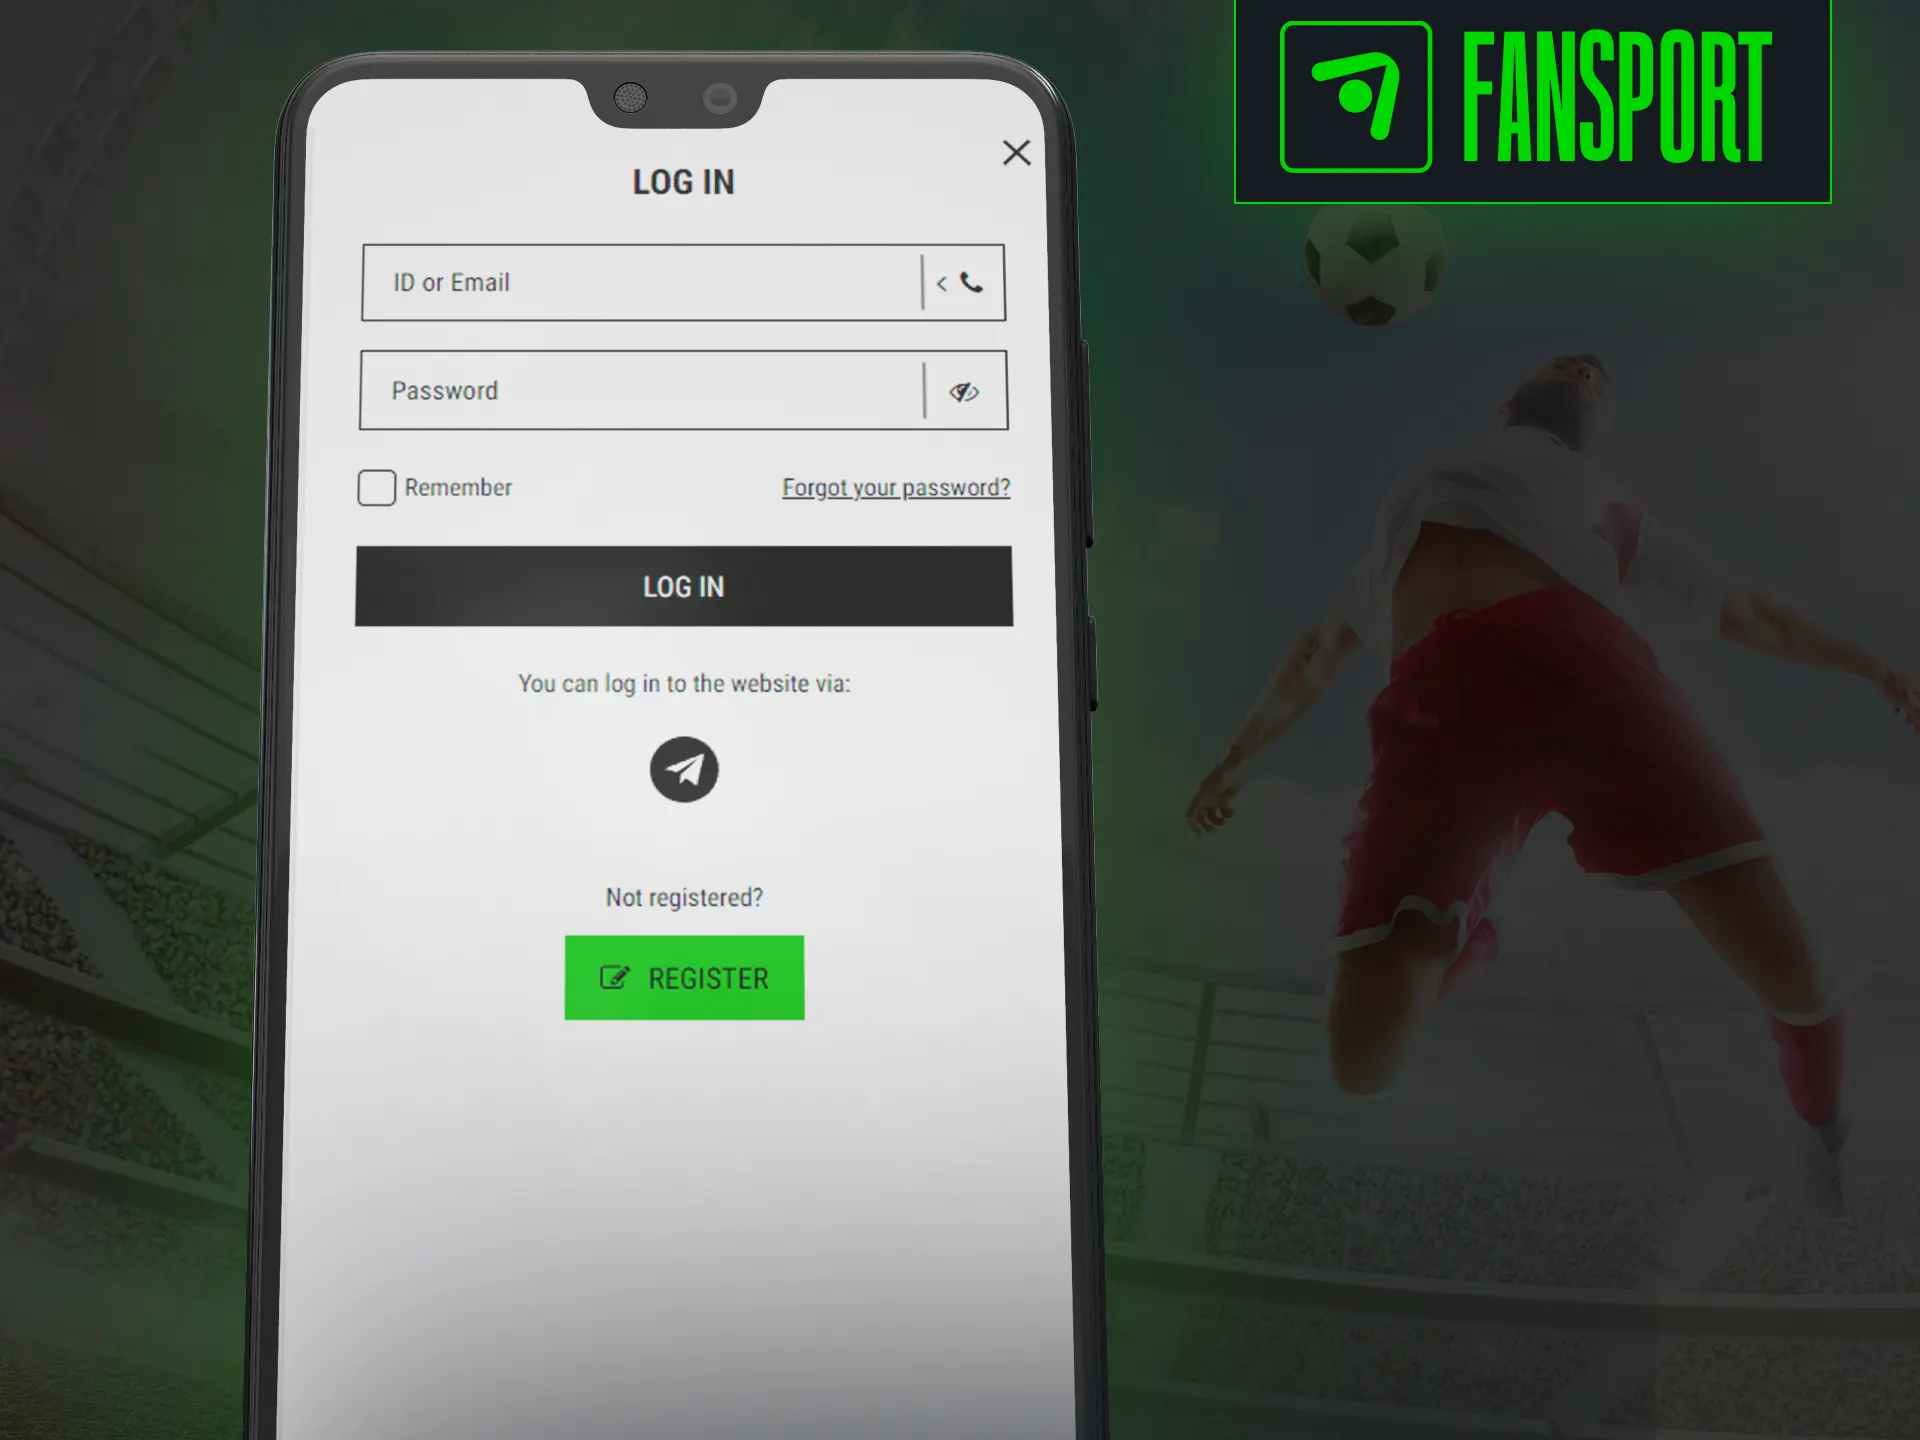 Log in to your Fansport account from your mobile device.